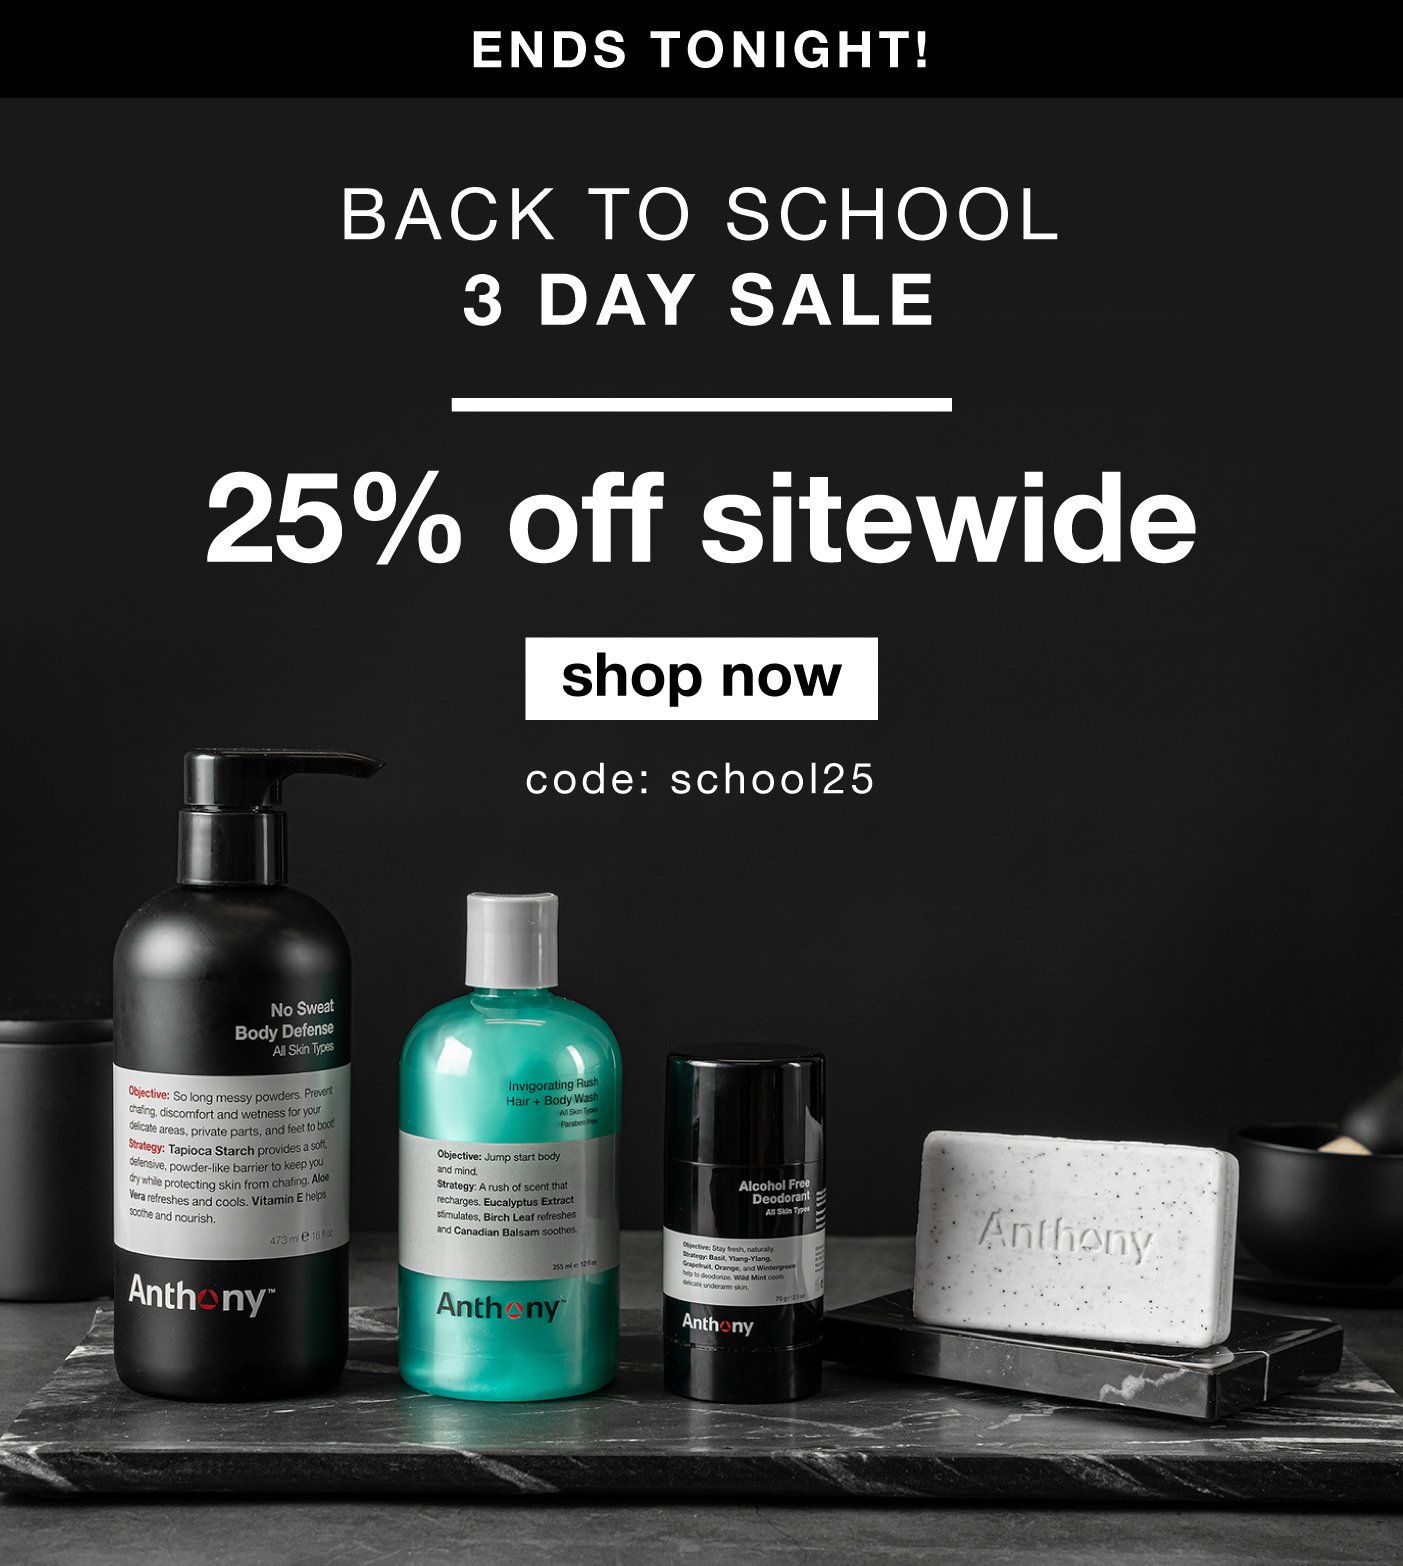 ENDS TONIGHT! Back to school sale - 25% off sitewide use code: SCHOOL25